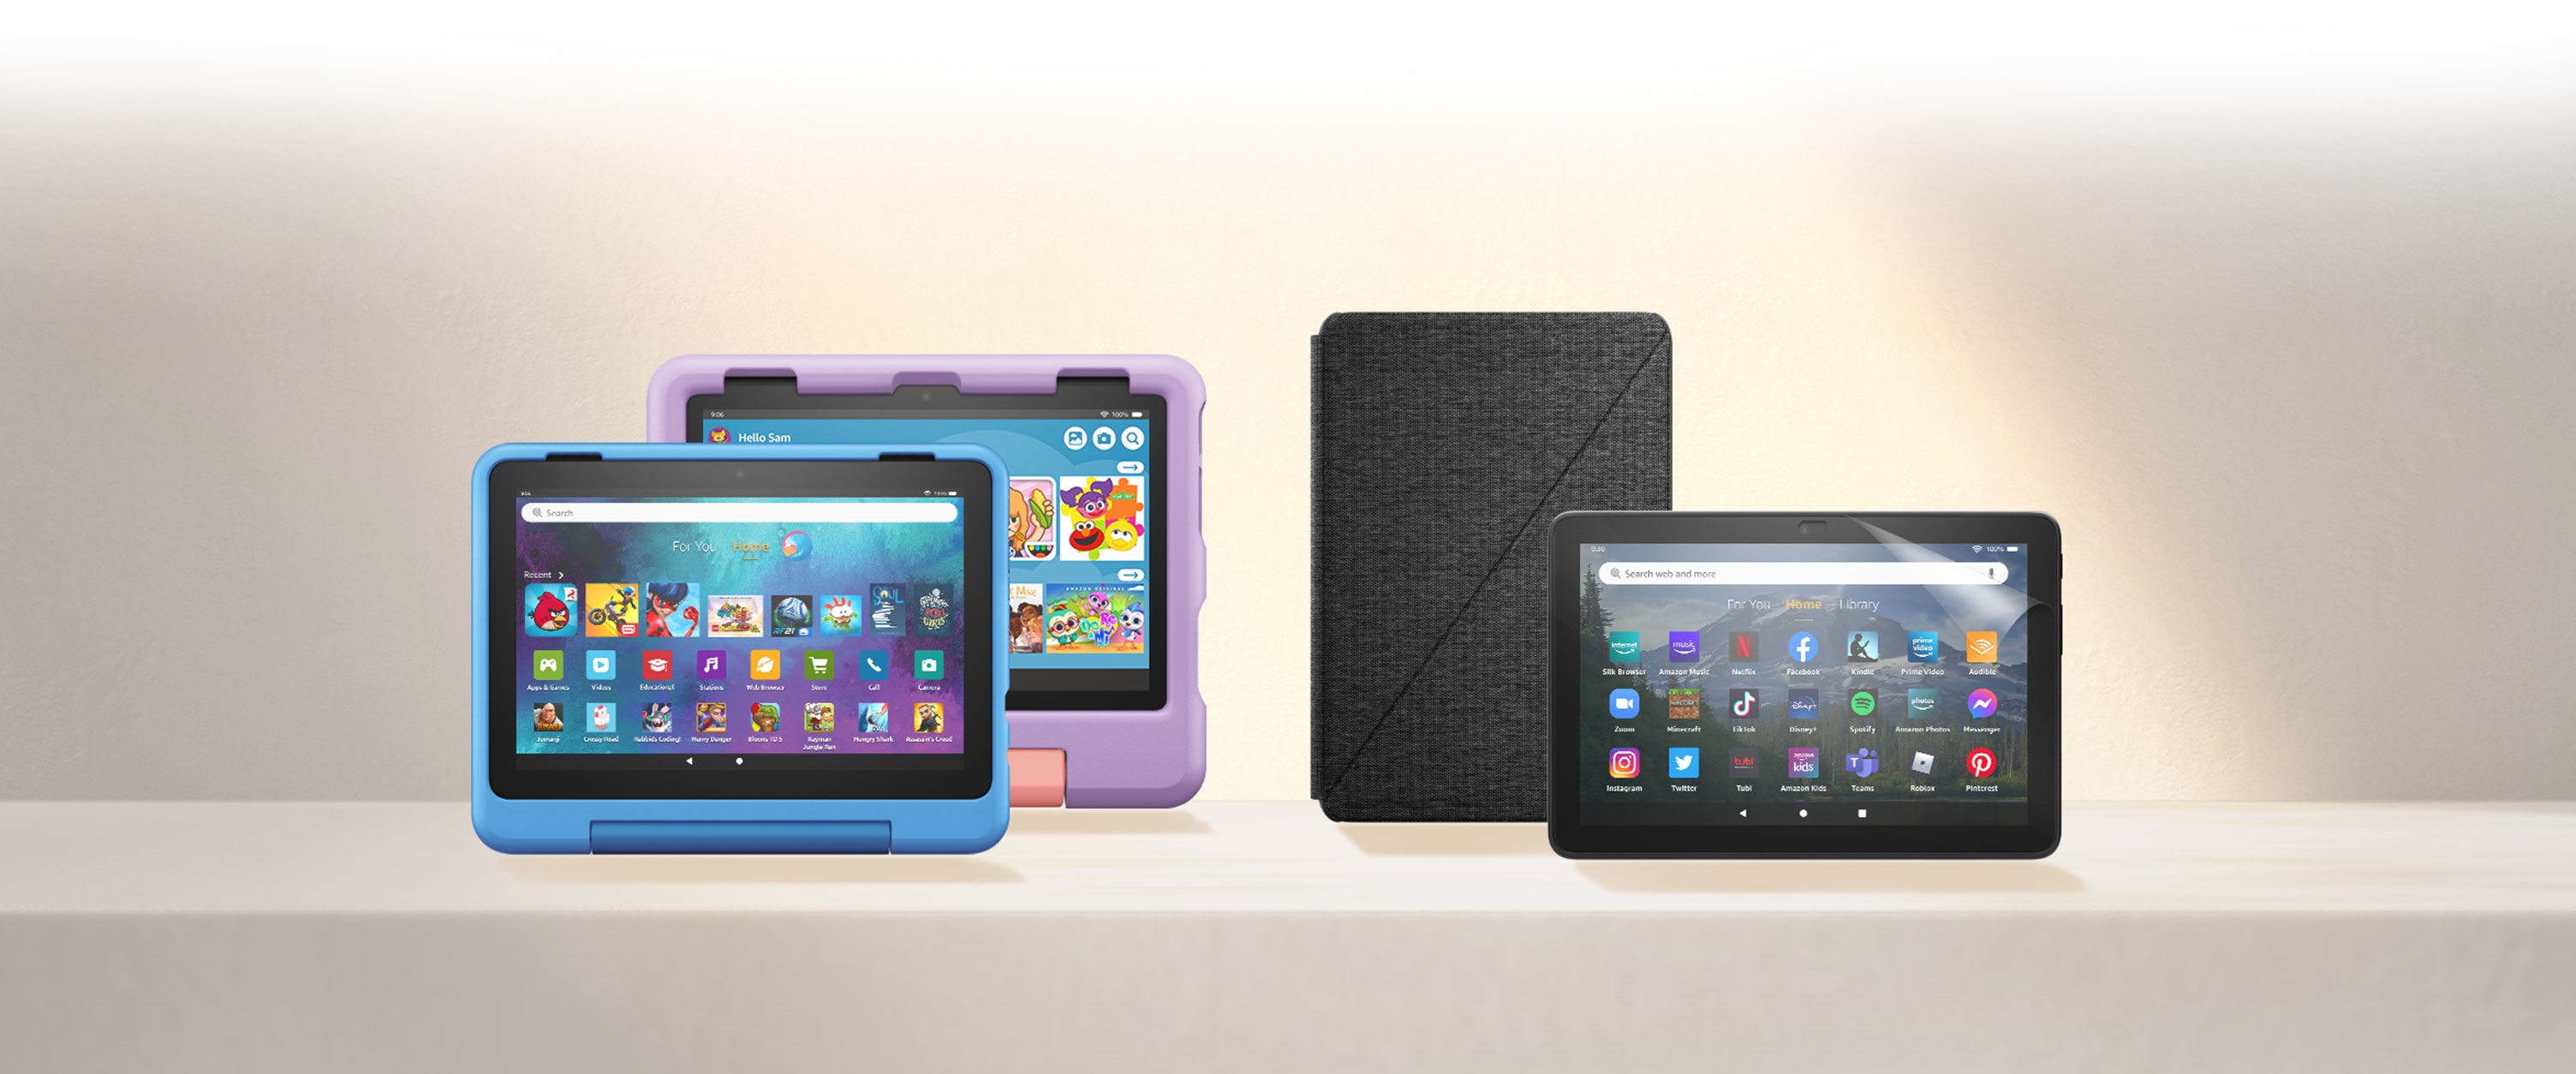 Amazon unveiled Fire HD 8 line of tablets with improved processors and Alexa support starting at $100